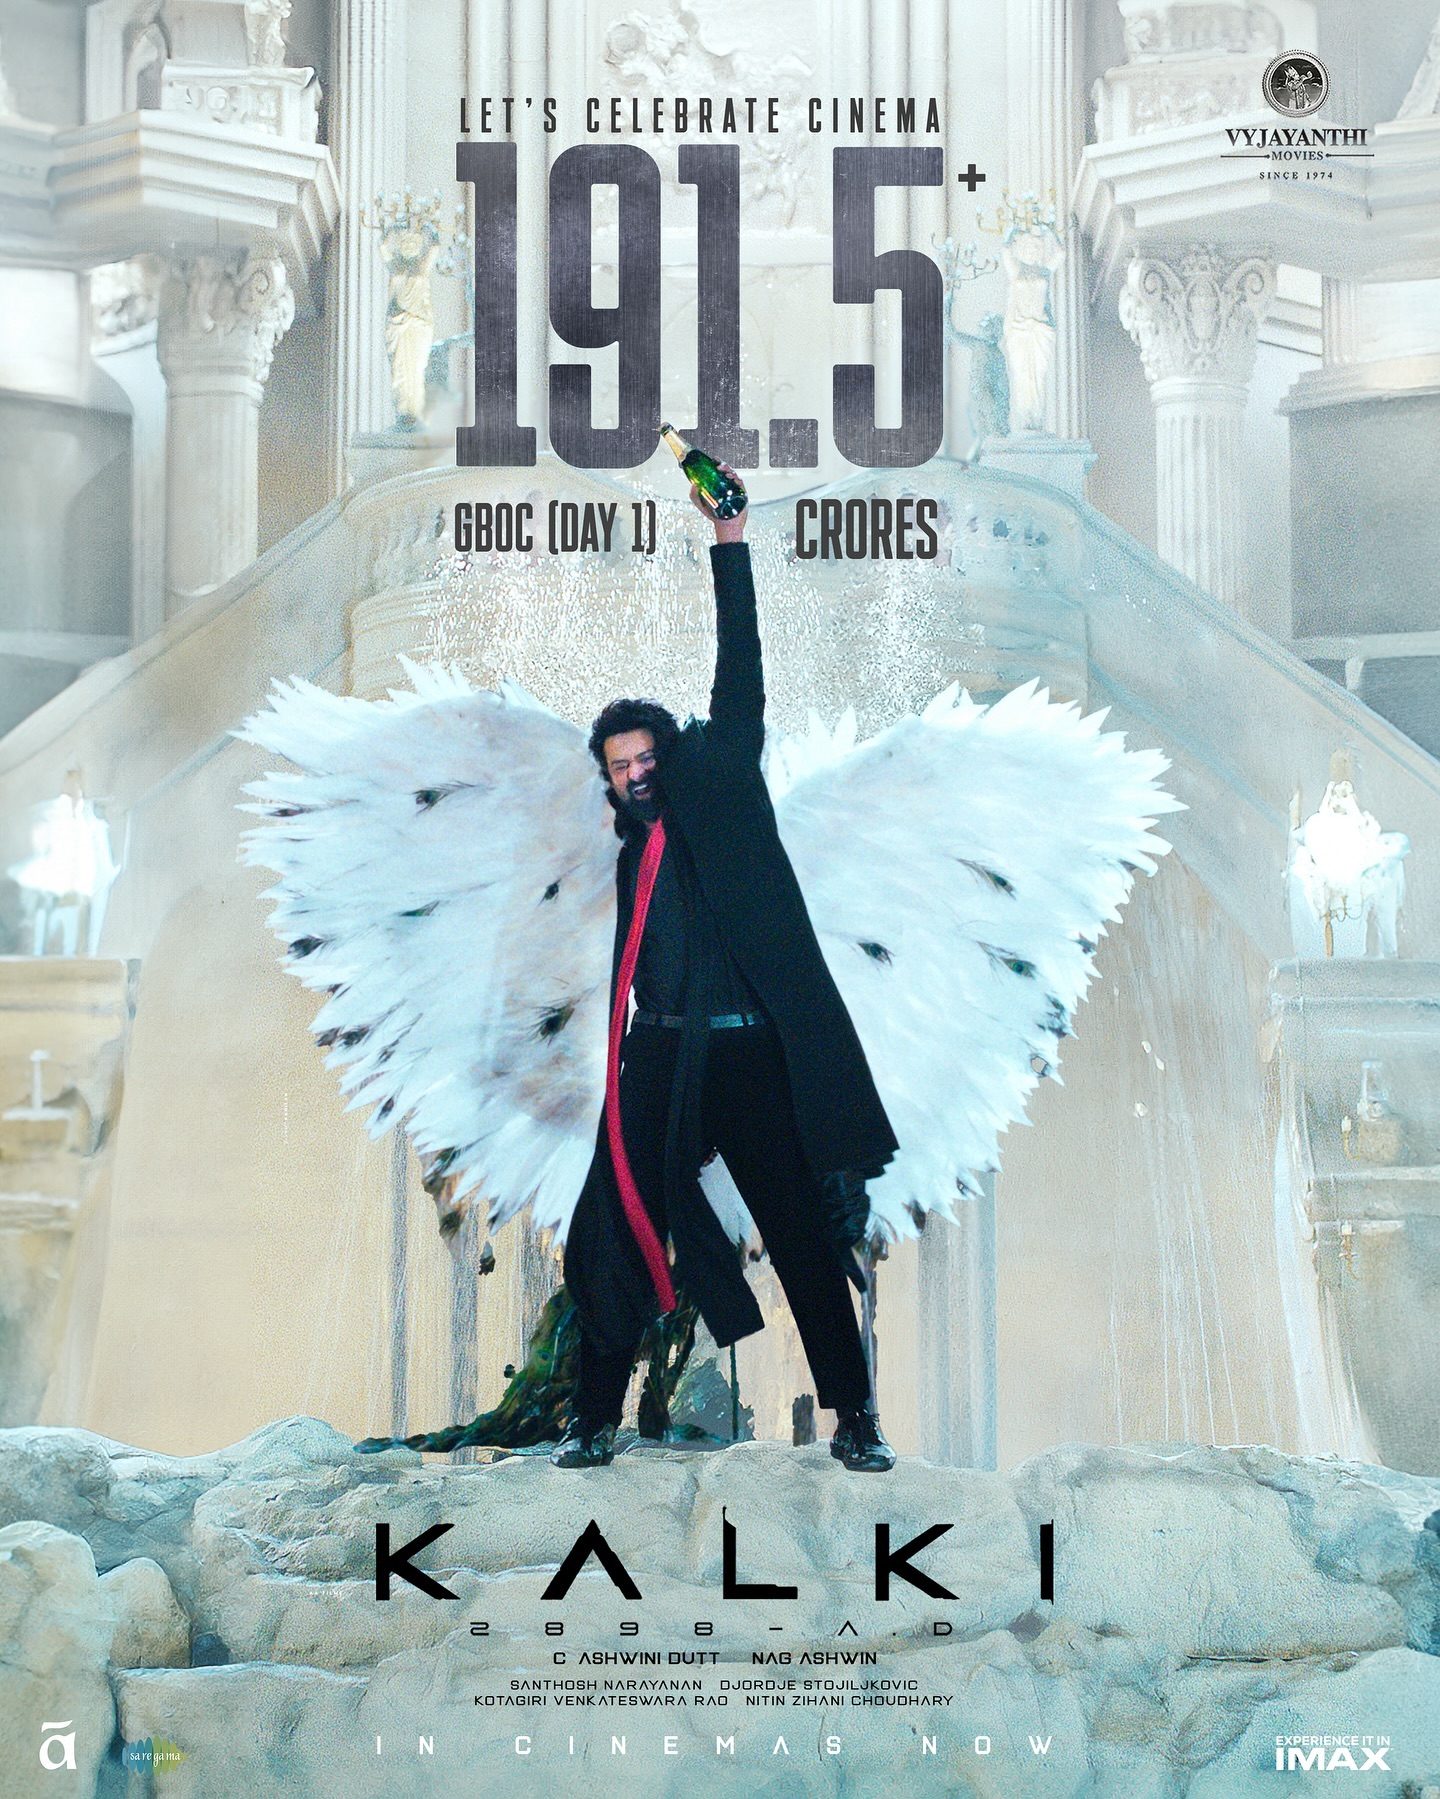 Kalki 2898 AD box office collections